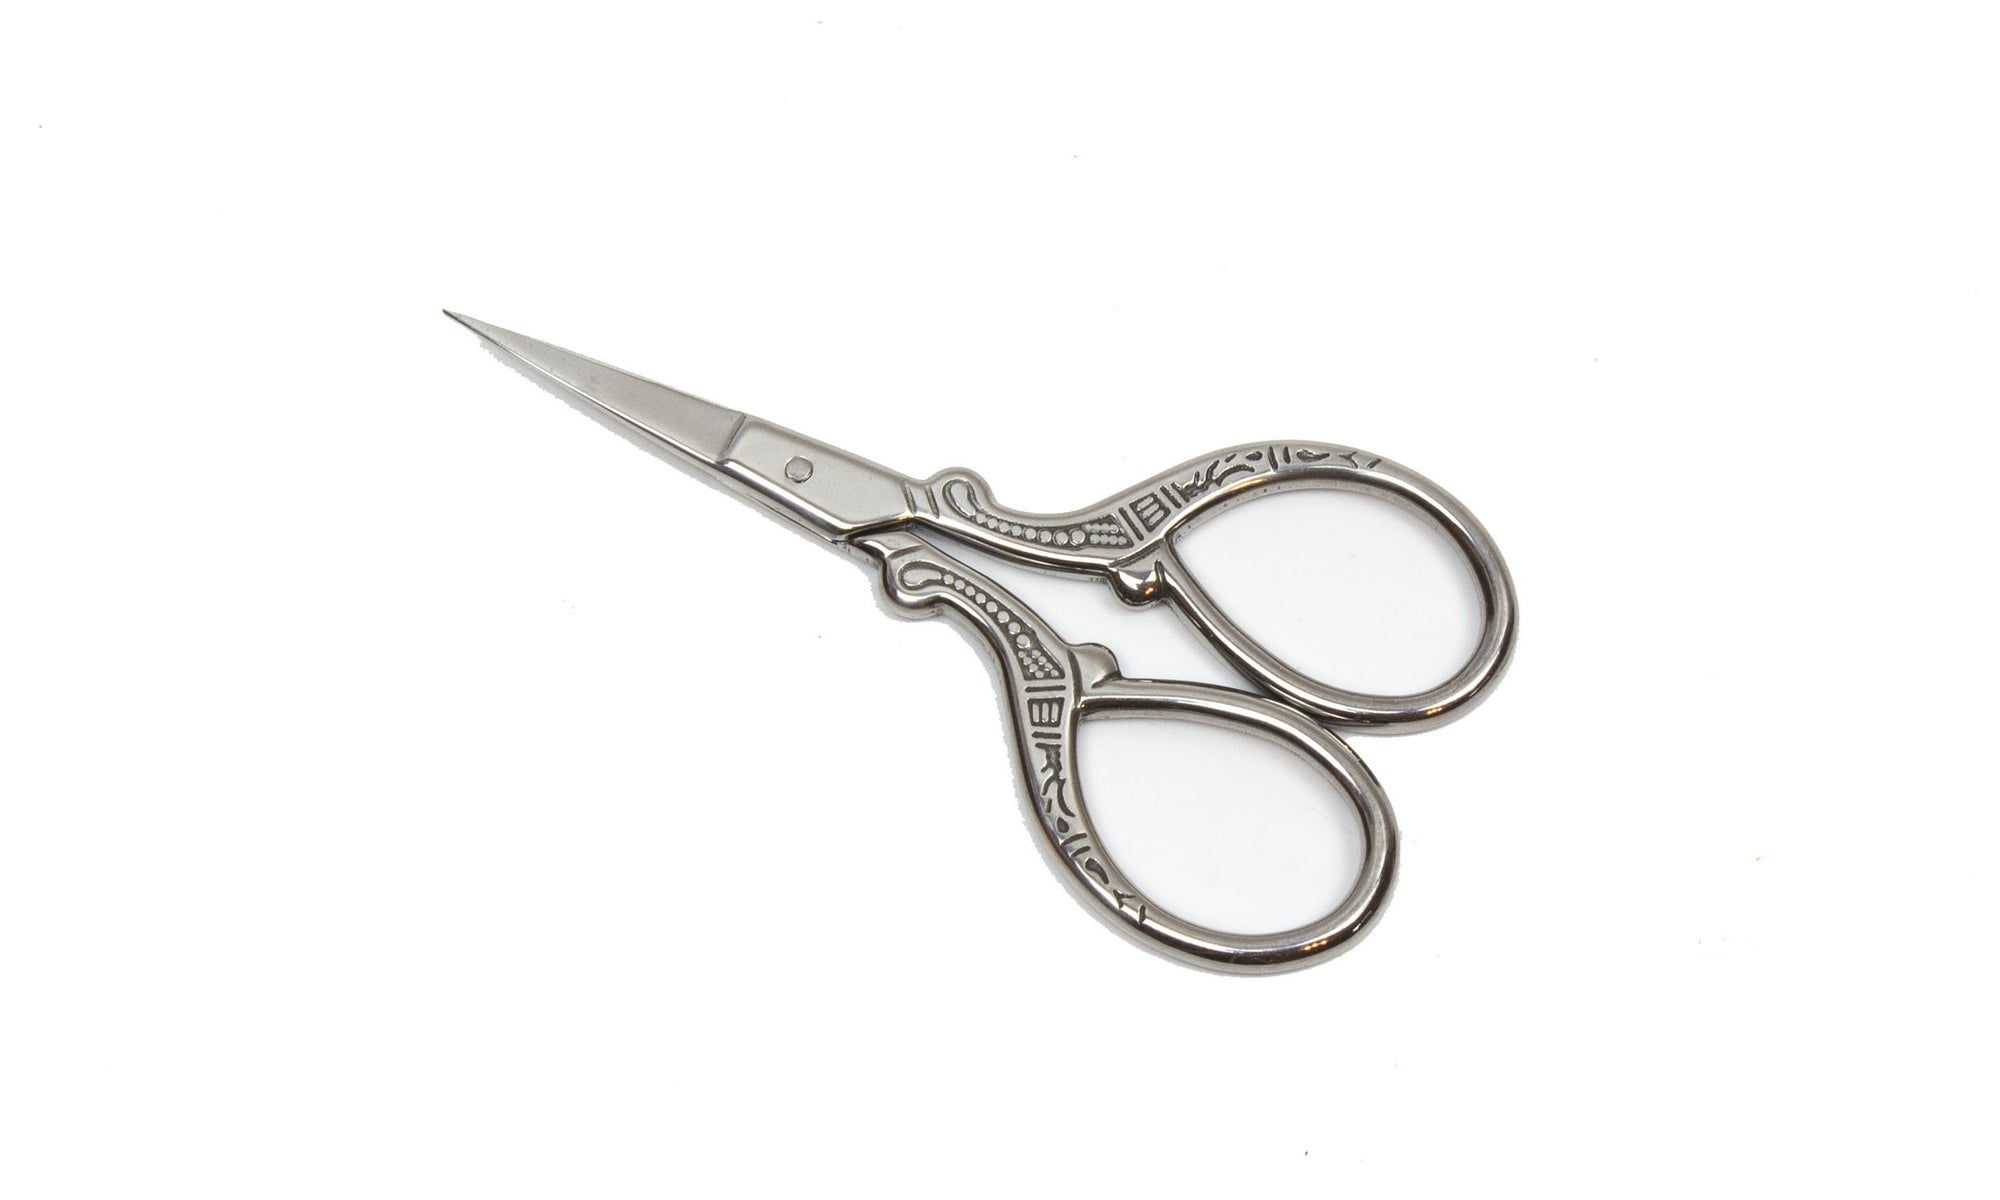 Embroidery Scissors 4" with Engraving - Silver - Humboldt Haberdashery